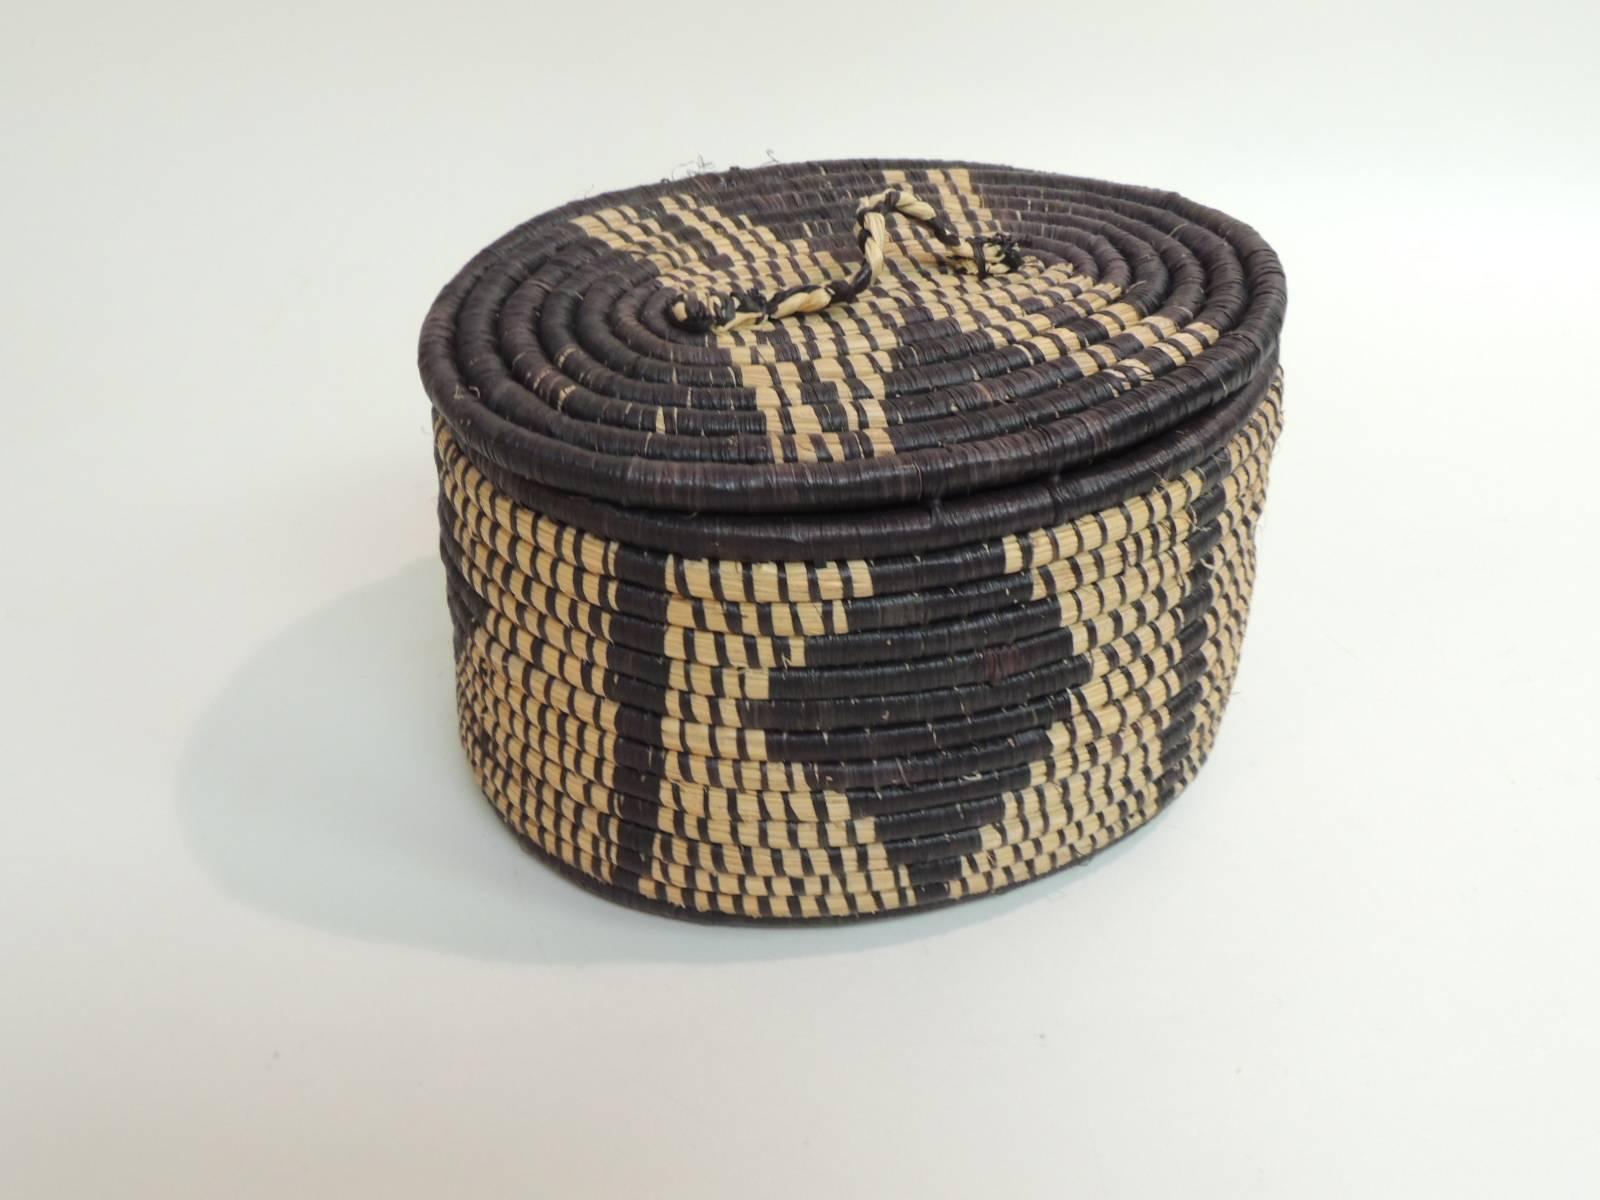 Tribal African Handwoven Oval Artisanal Basket with Lid